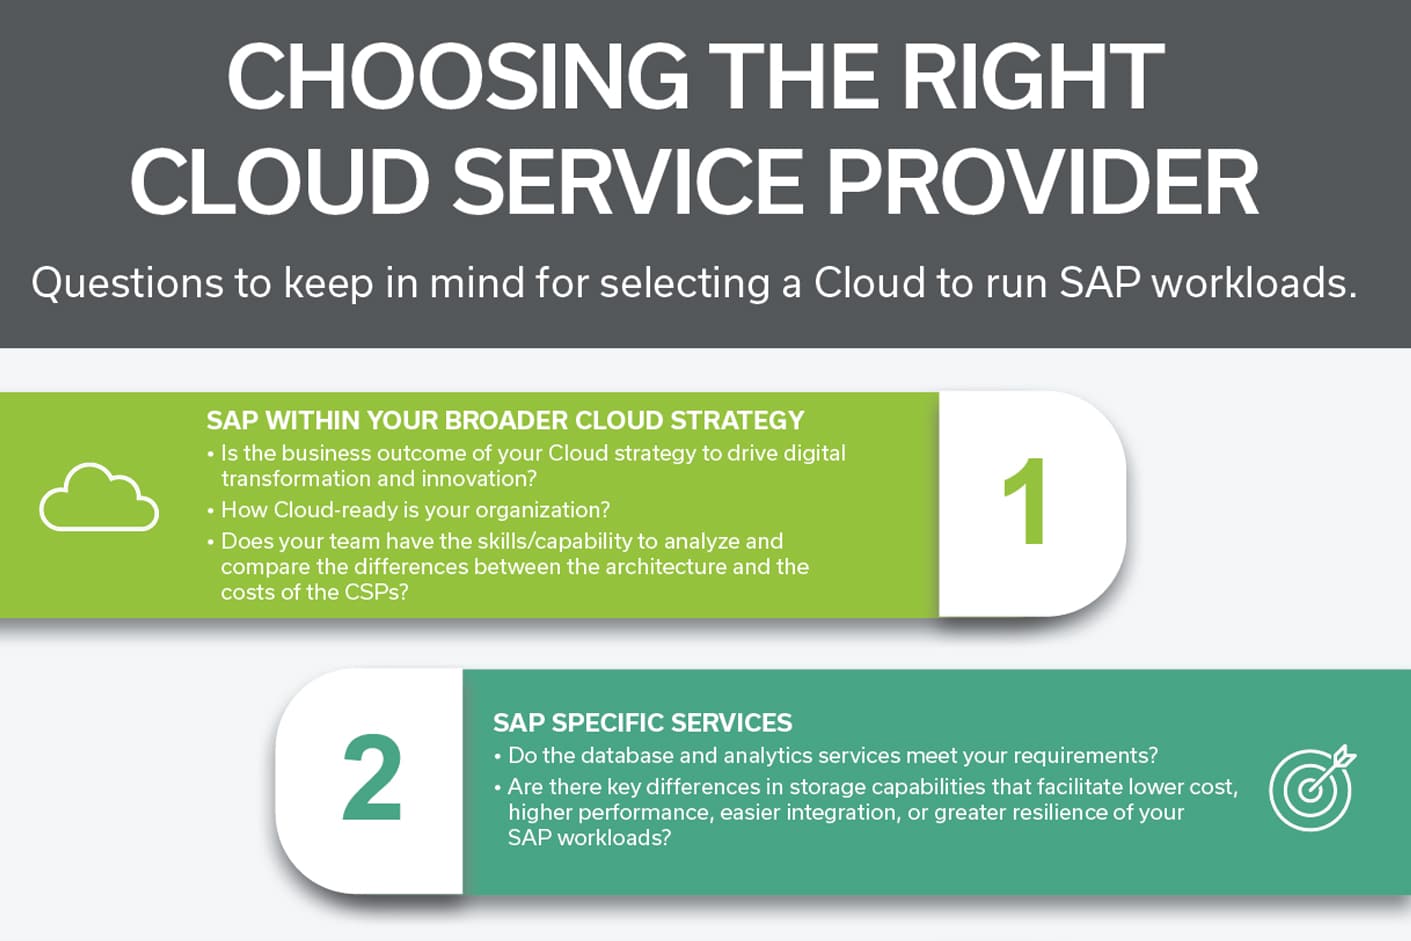 How to choose the right cloud service provider